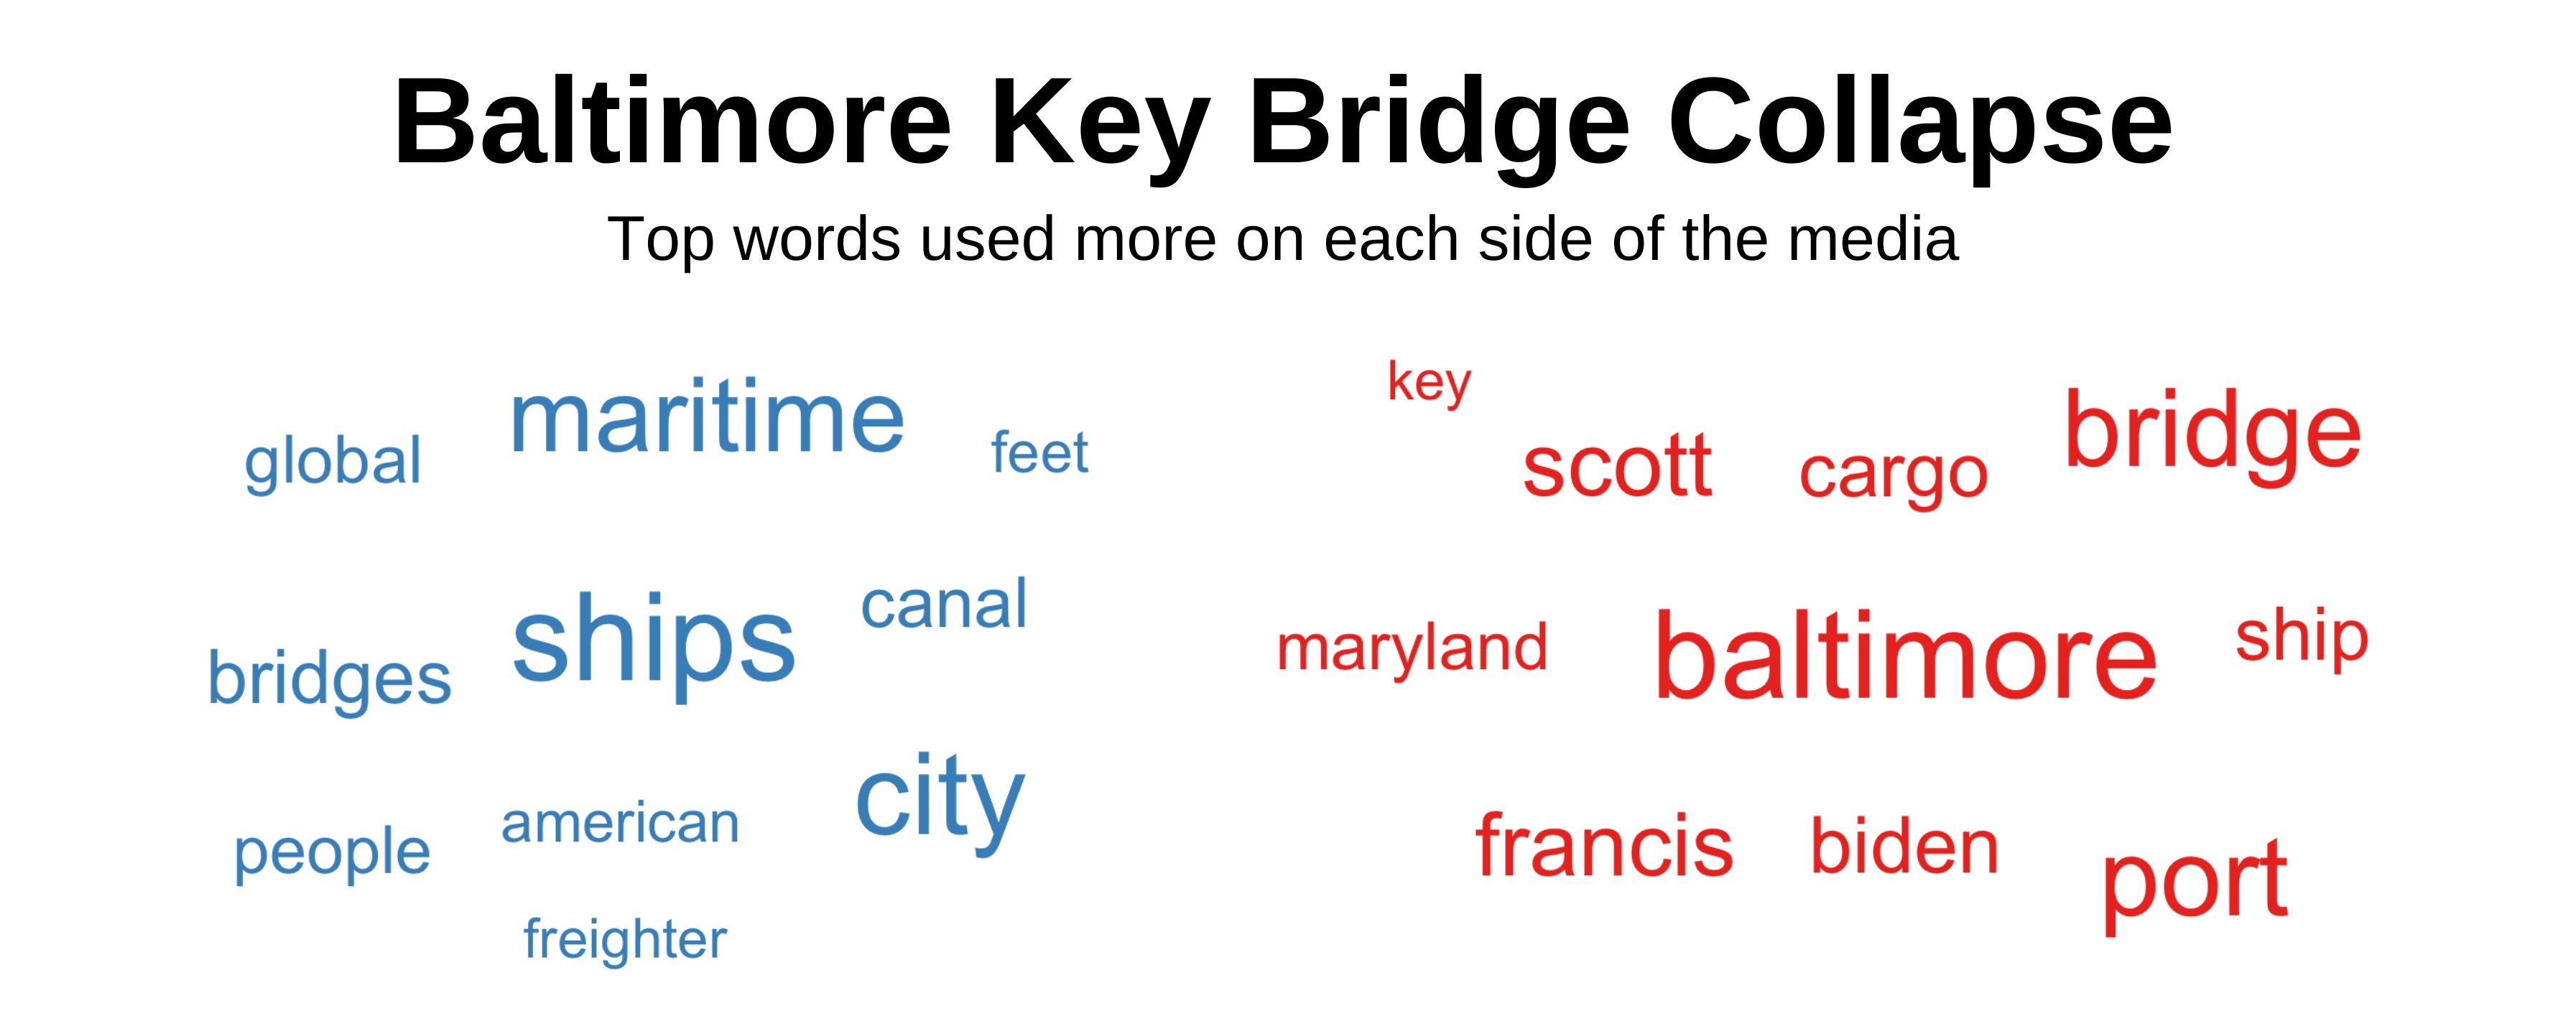 Top words about the Francis Scott Key Bridge used more on each side of the media.